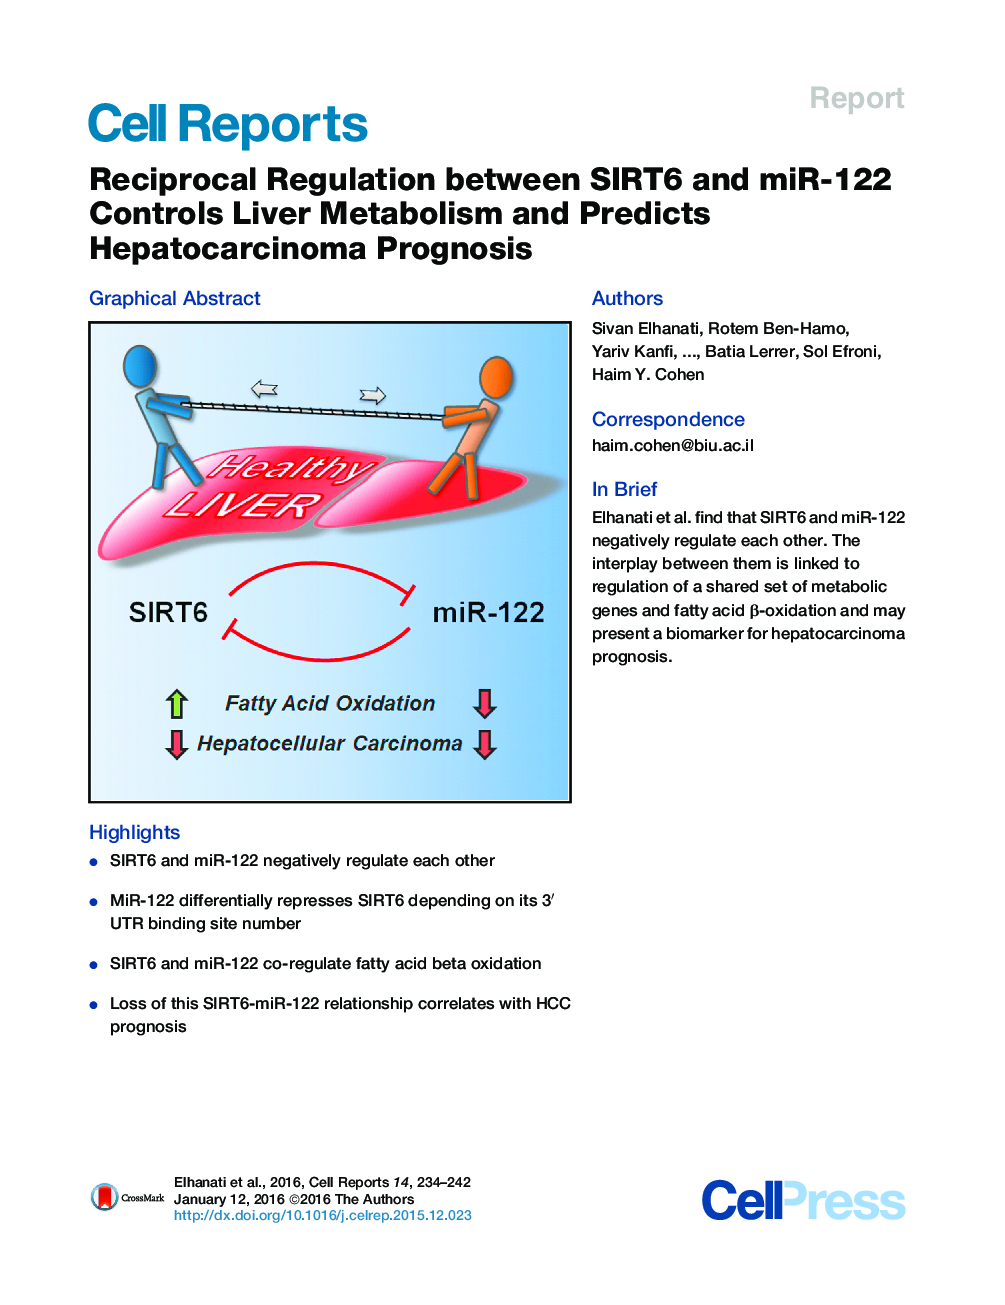 Reciprocal Regulation between SIRT6 and miR-122 Controls Liver Metabolism and Predicts Hepatocarcinoma Prognosis 